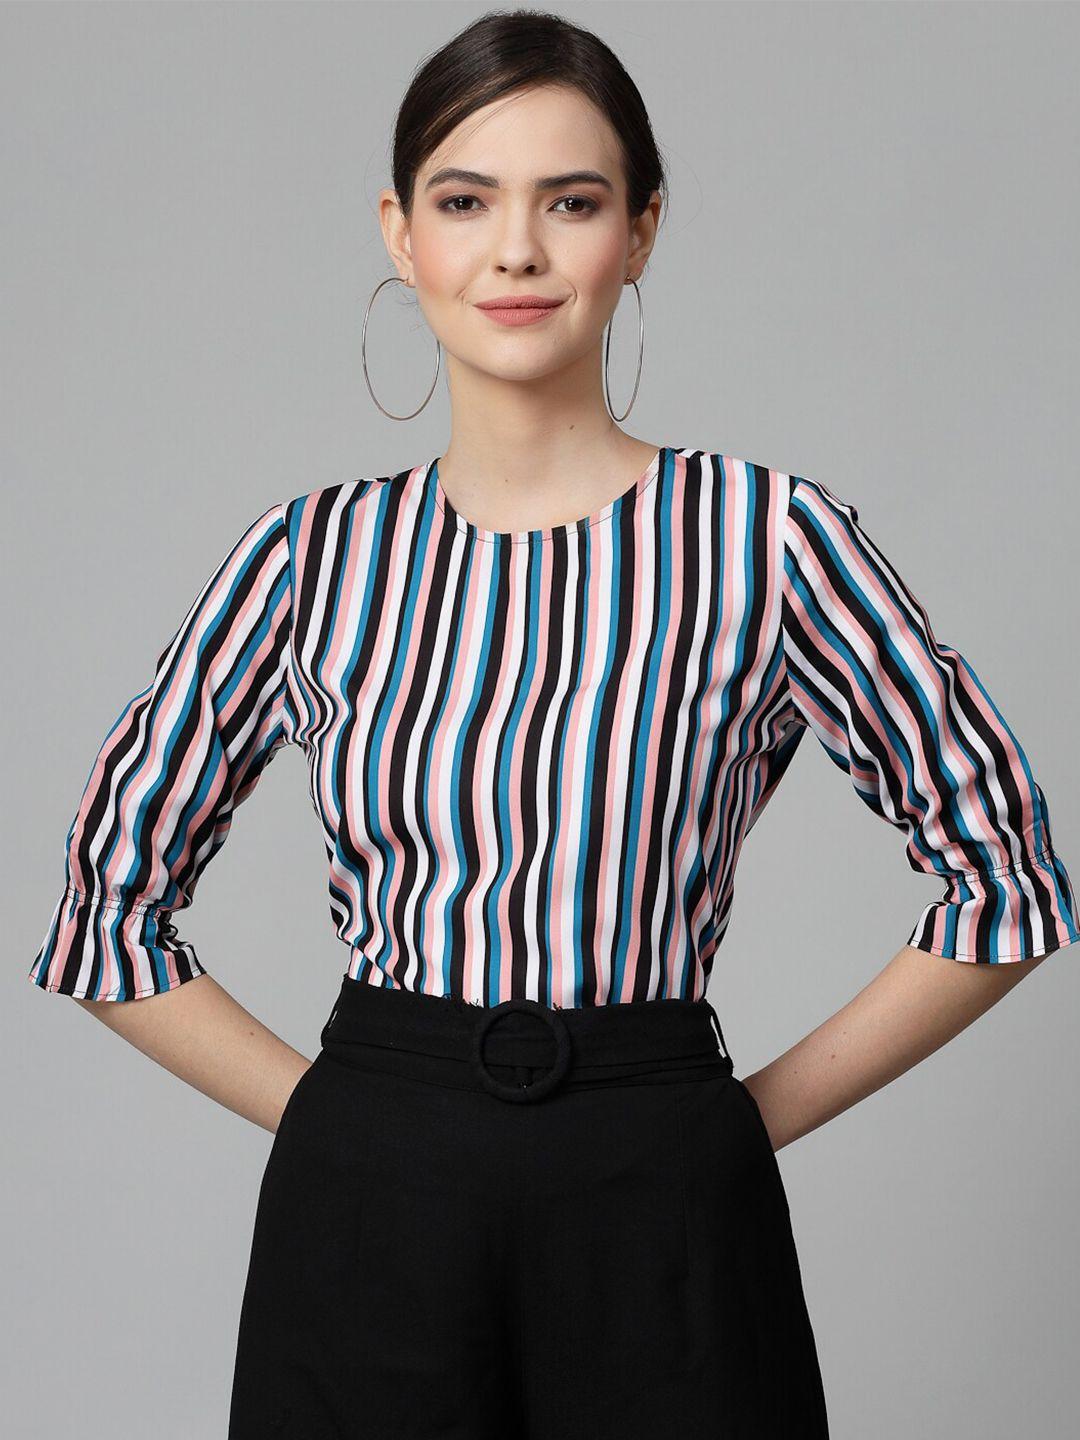 style quotient pink & black striped round neck top